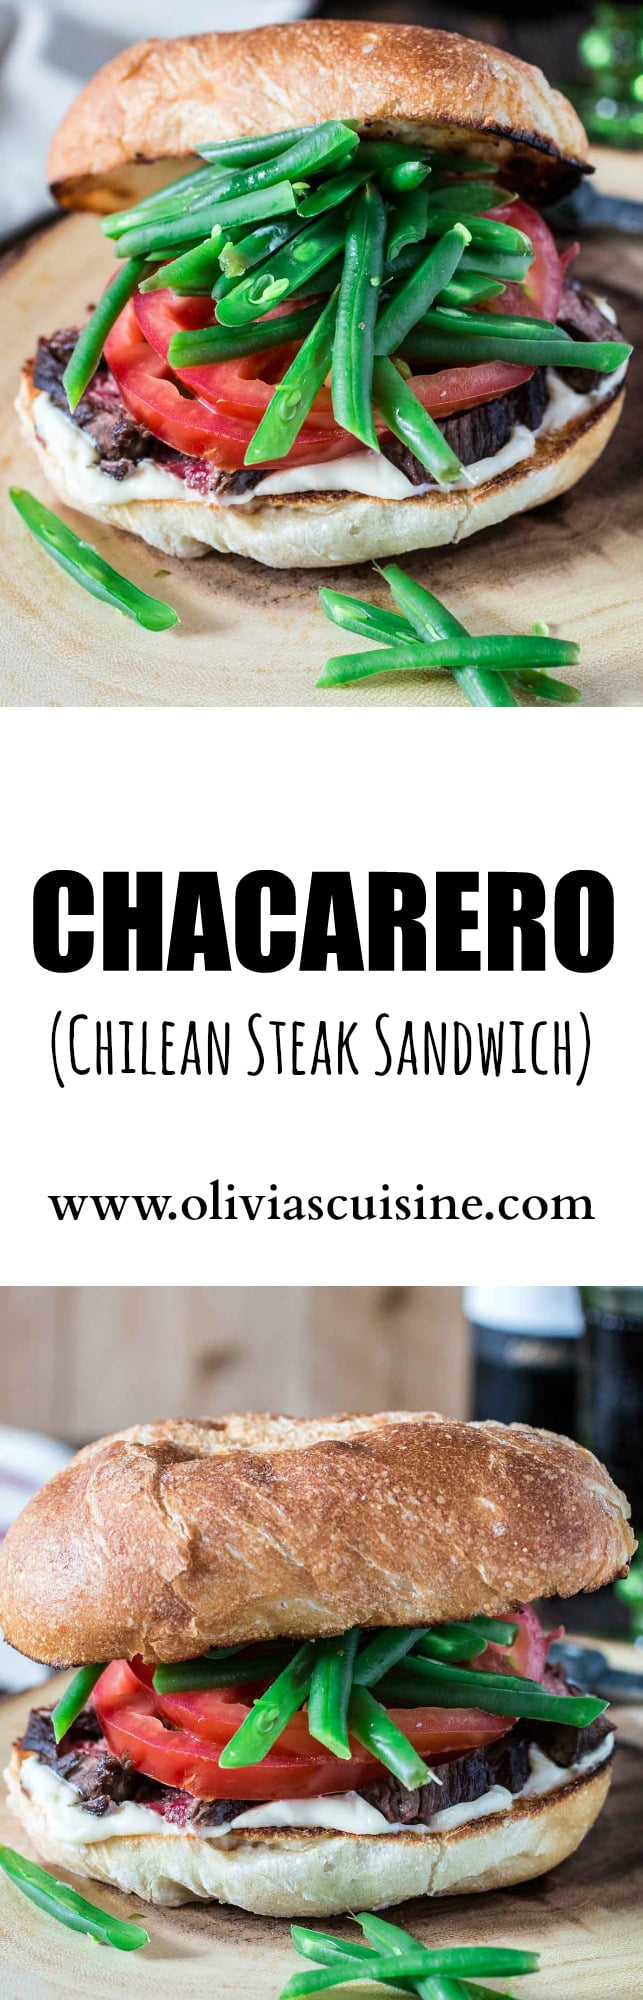 Chacarero (Chilean Steak Sandwich) | www.oliviascuisine.com | This is Chile's national sandwich. It consists of a roll piled high with grilled meat, tomatoes, a dollop of mayo, hot sauce and green beans! In partnership with Santa Rita Wines. #120DaysOfSummer (Food styling and photography by Olivia Mesquita.) 